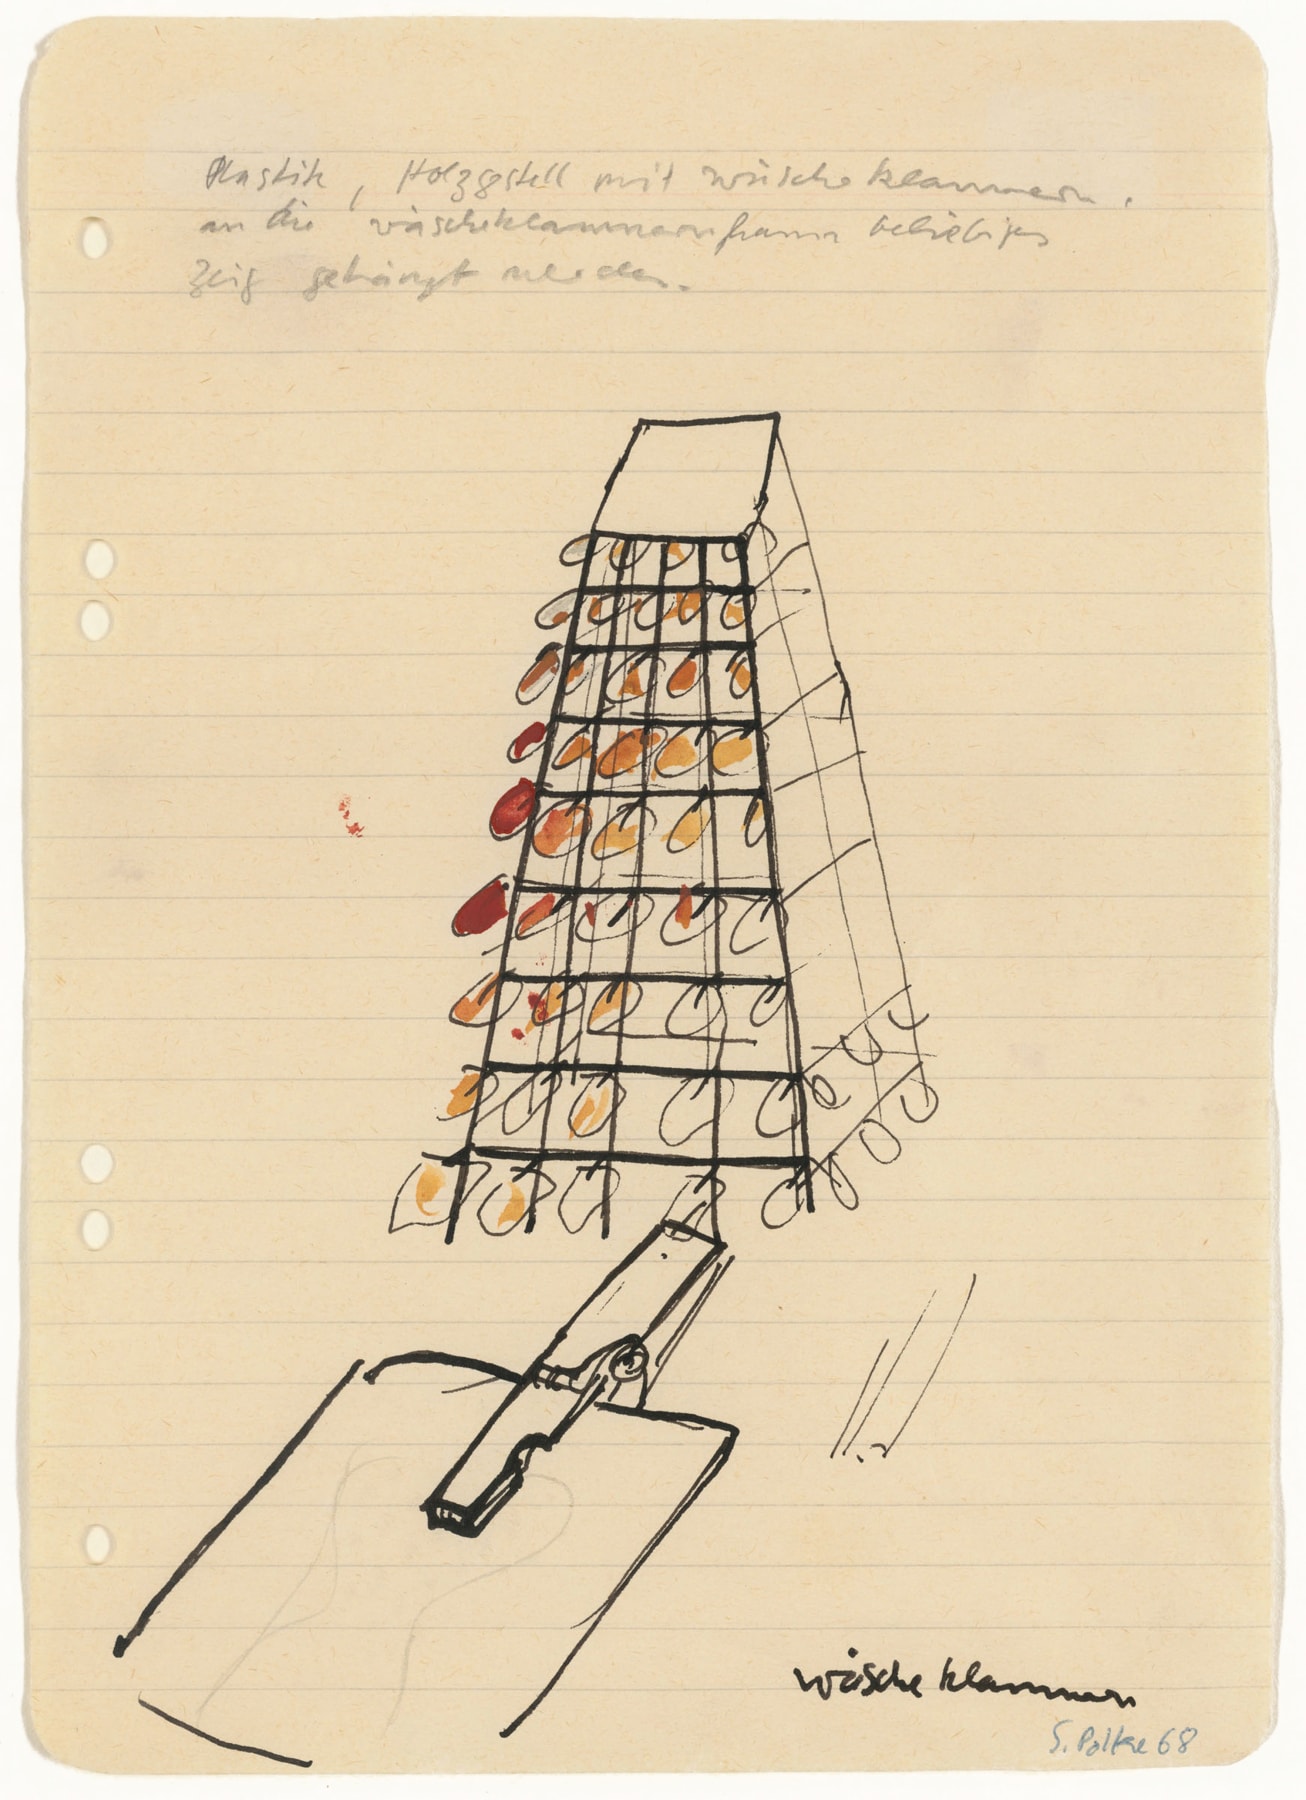 &quot;Sculpture, wooden framework with clothespins, random items can be attached to the clothespins&quot;, 1968